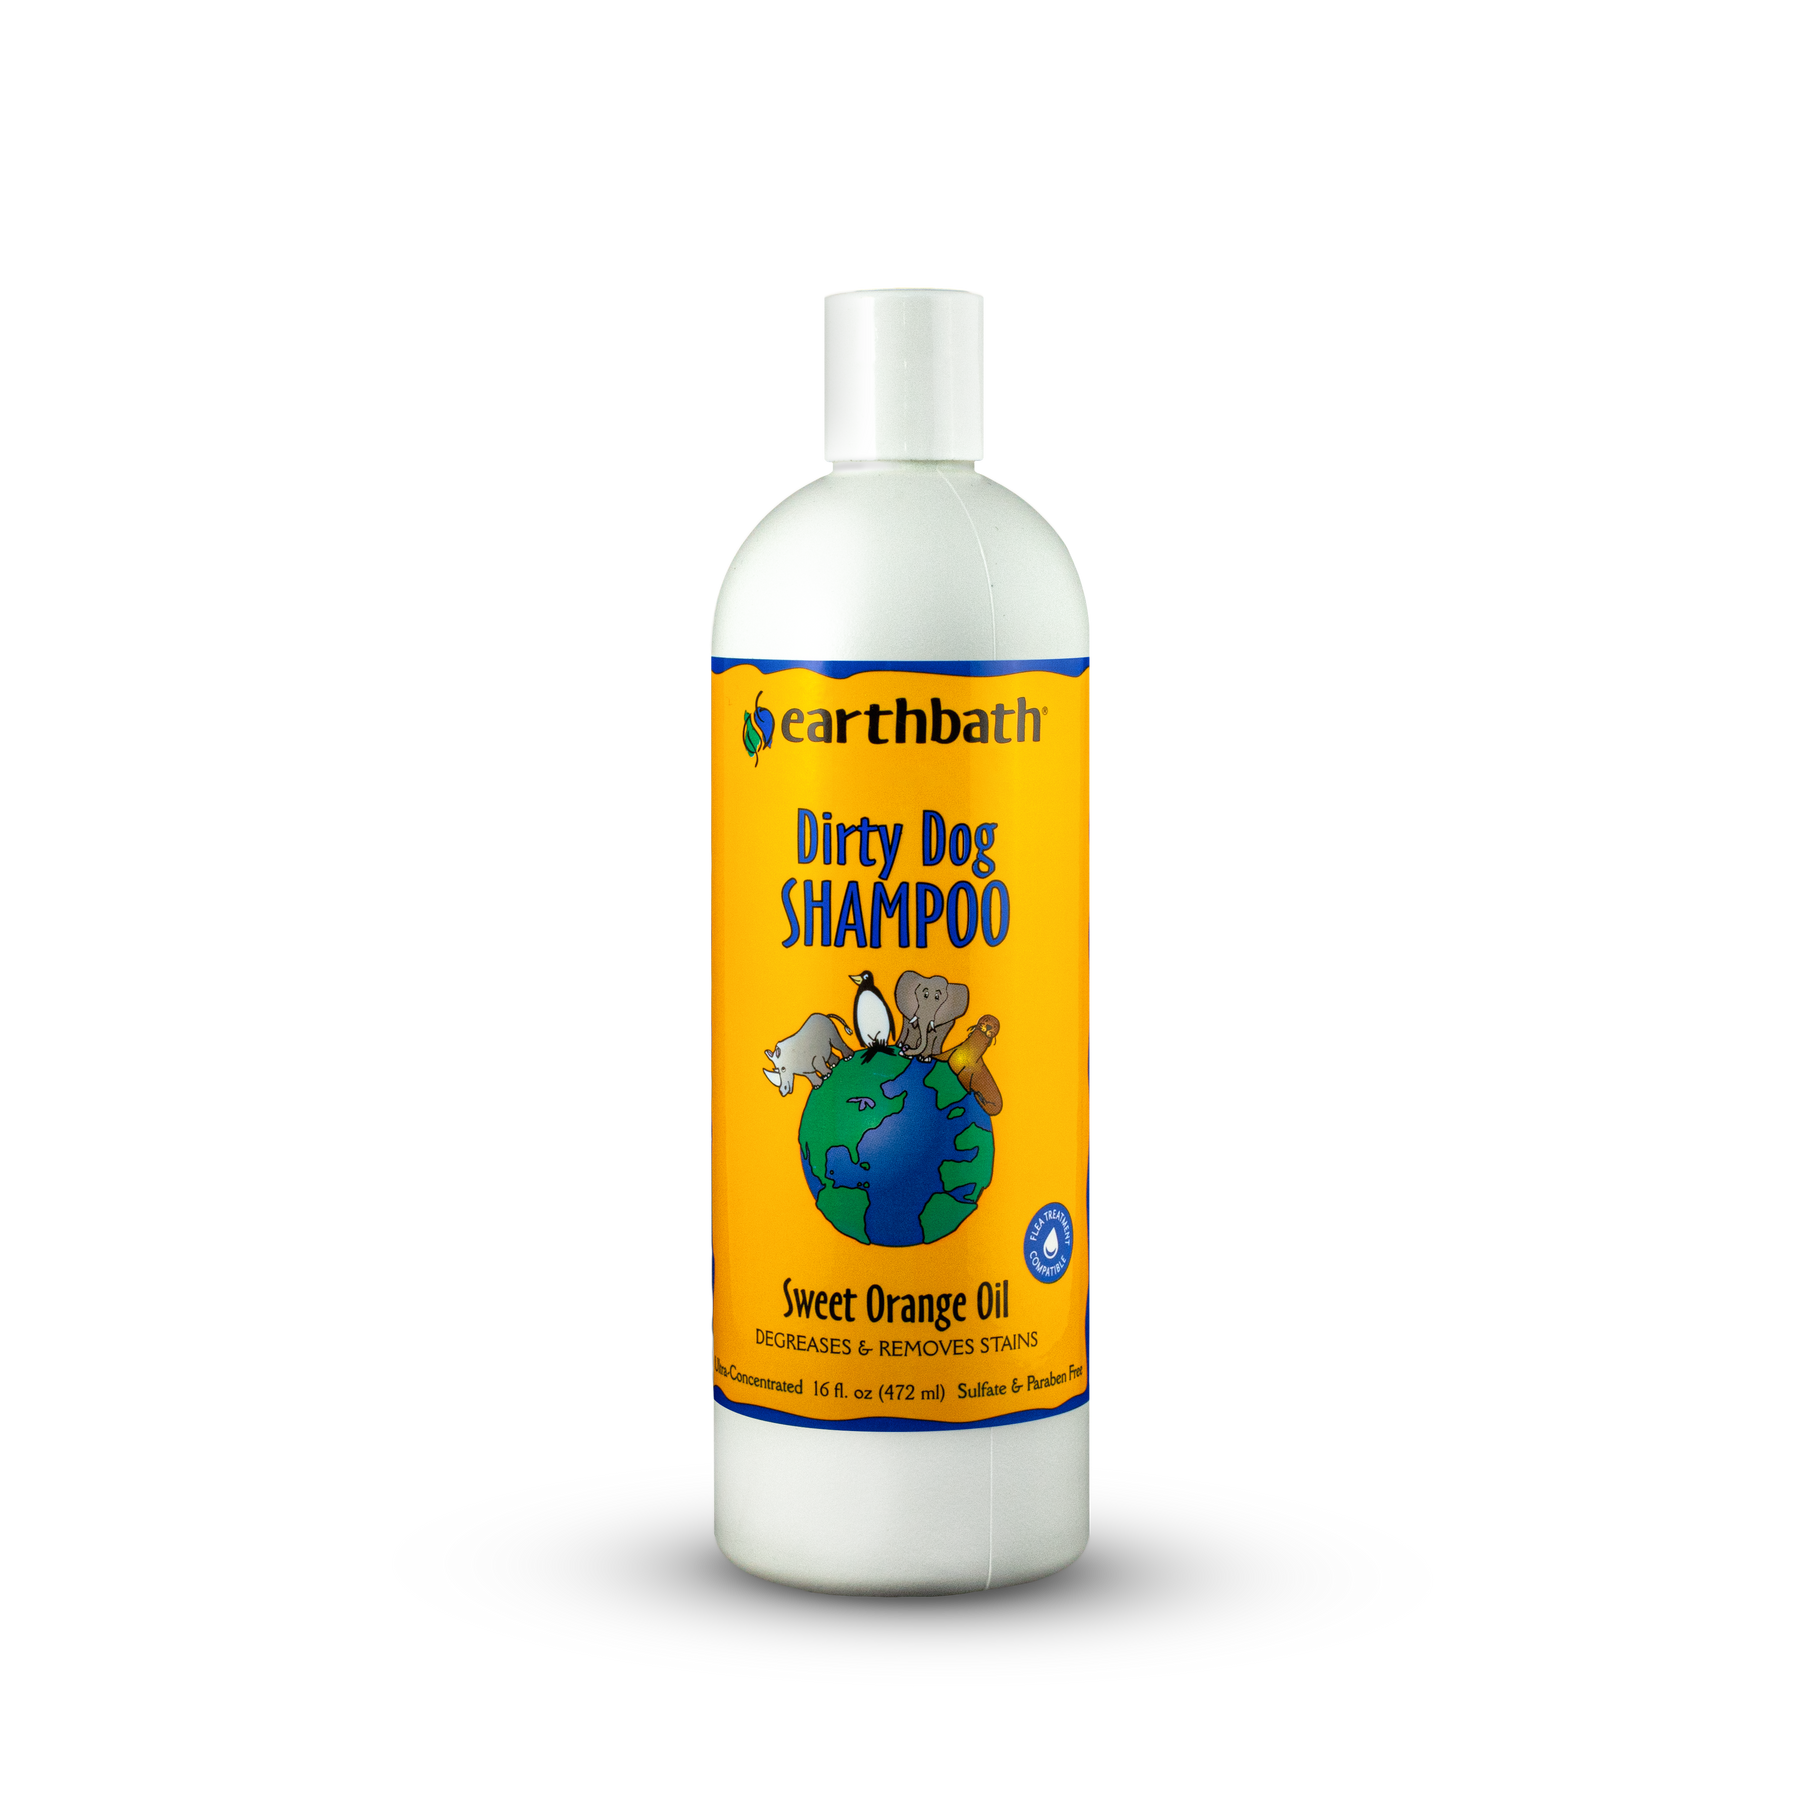 earthbath® Dirty Dog Shampoo Sweet Orange Oil, Degreases & Removes Stains, Made in USA, 16 oz